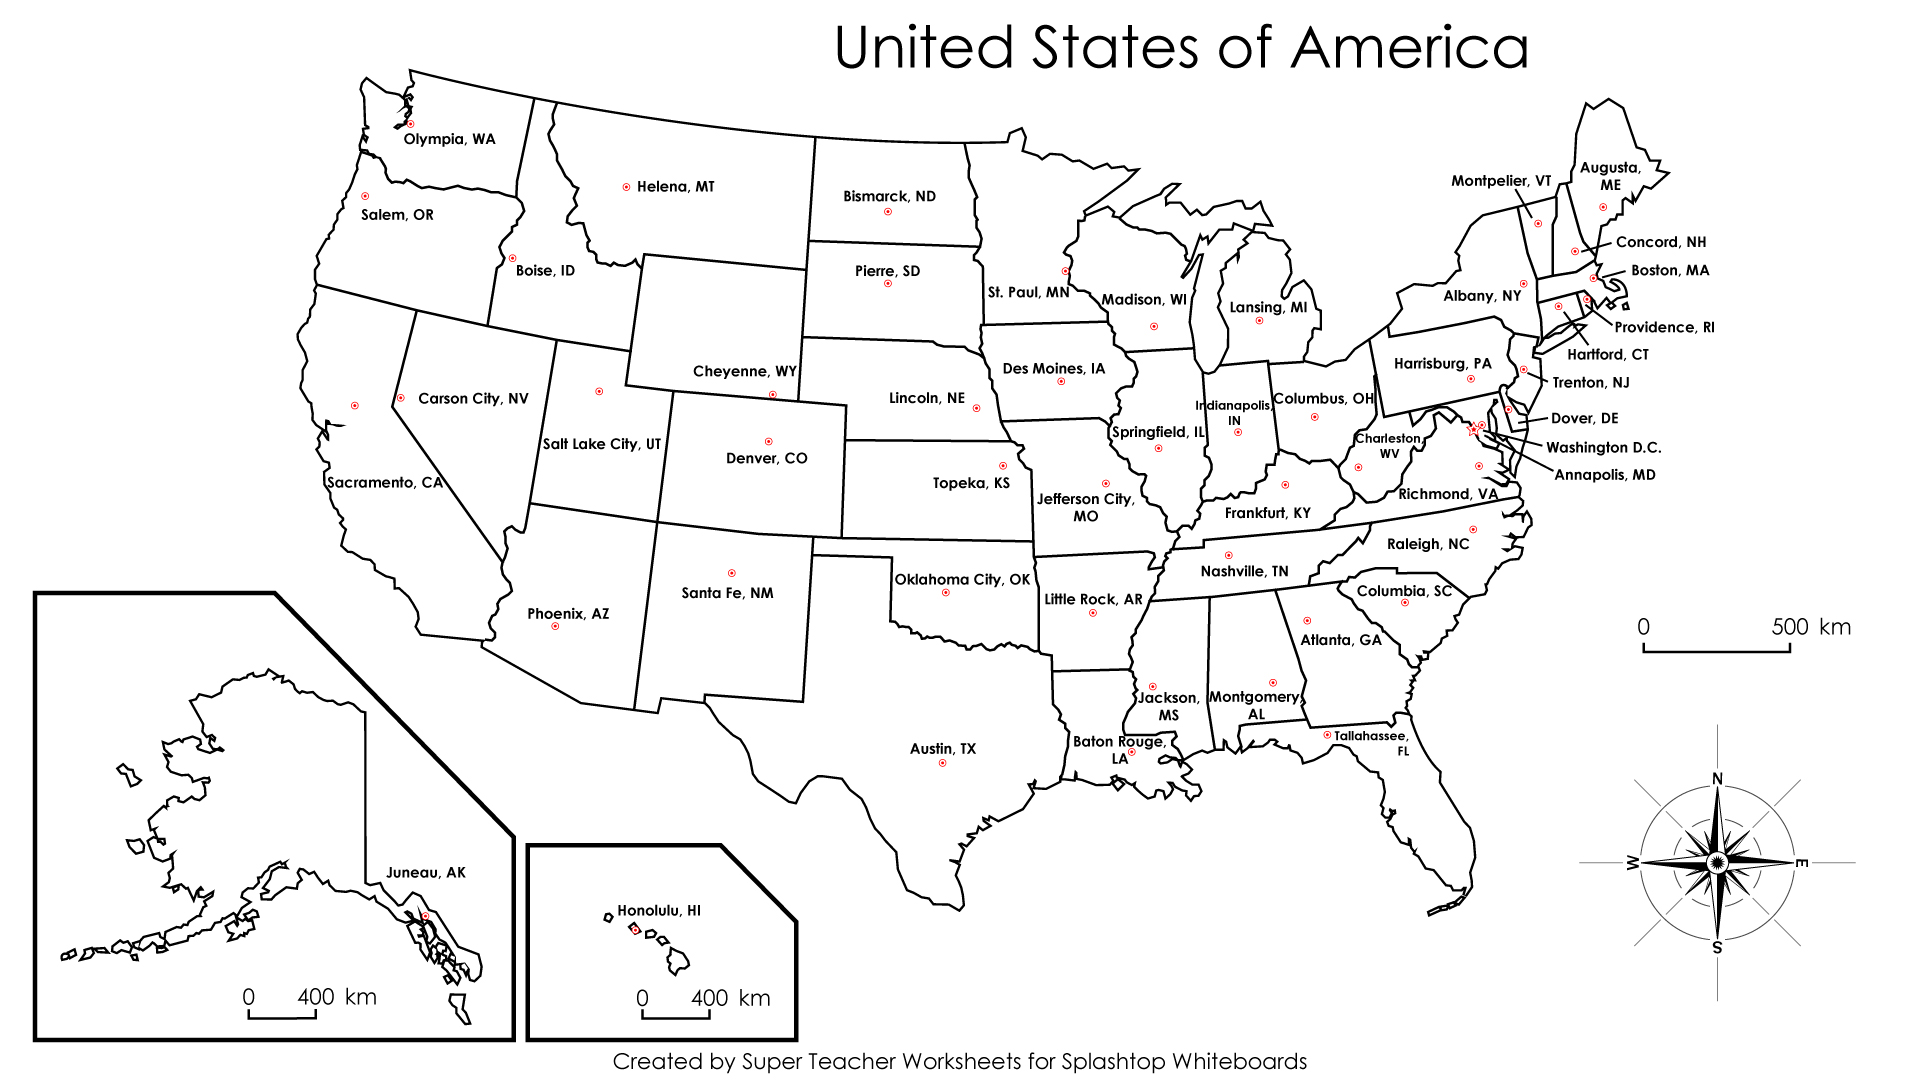 9 Best Images of Worksheets 50 States - 50 States and Capitals